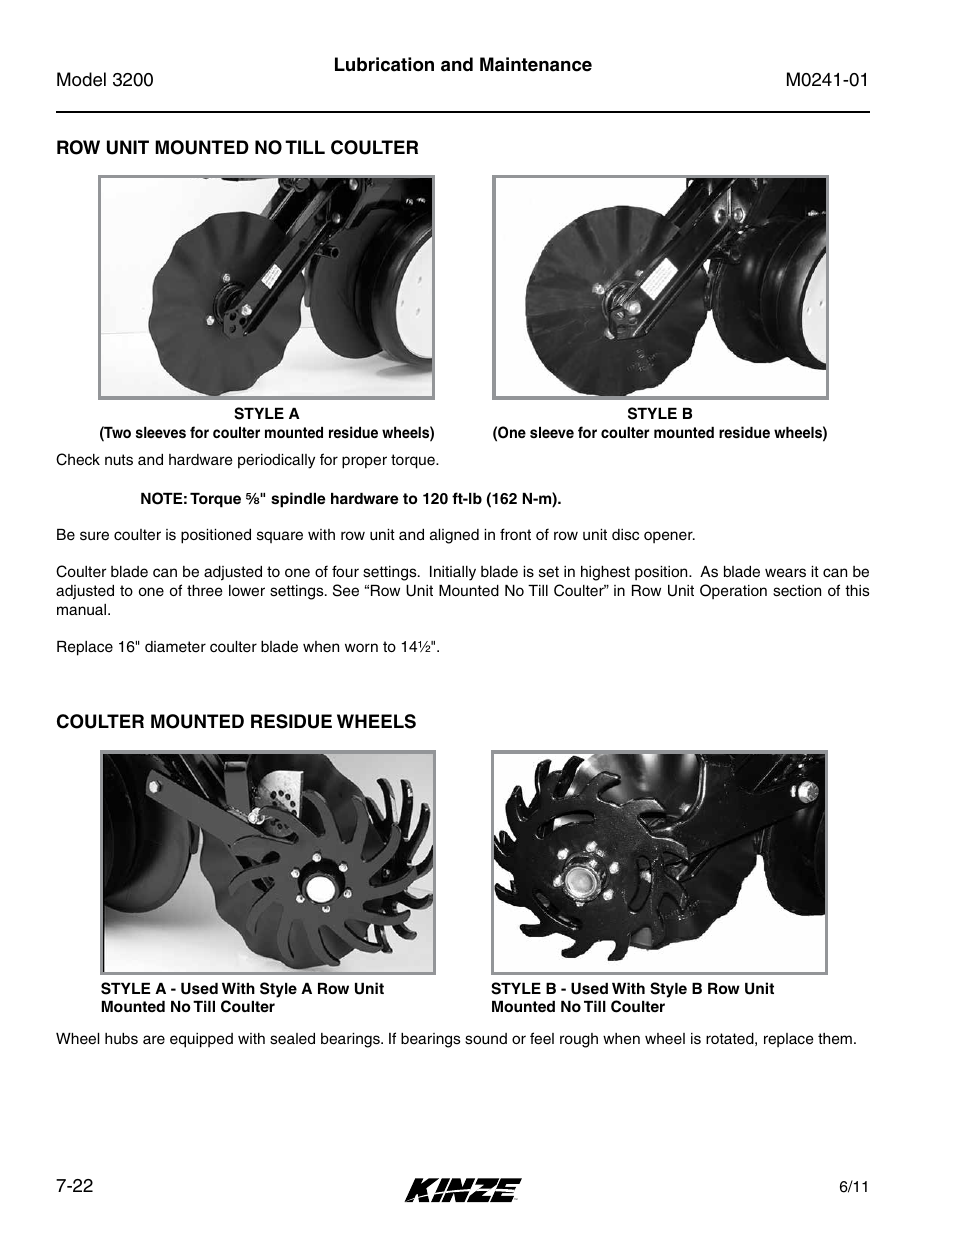 Row unit mounted no till coulter, Coulter mounted residue wheels, Row unit mounted no till coulter -22 | Coulter mounted residue wheels -22 | Kinze 3200 Wing-Fold Planter Rev. 7/14 User Manual | Page 162 / 192